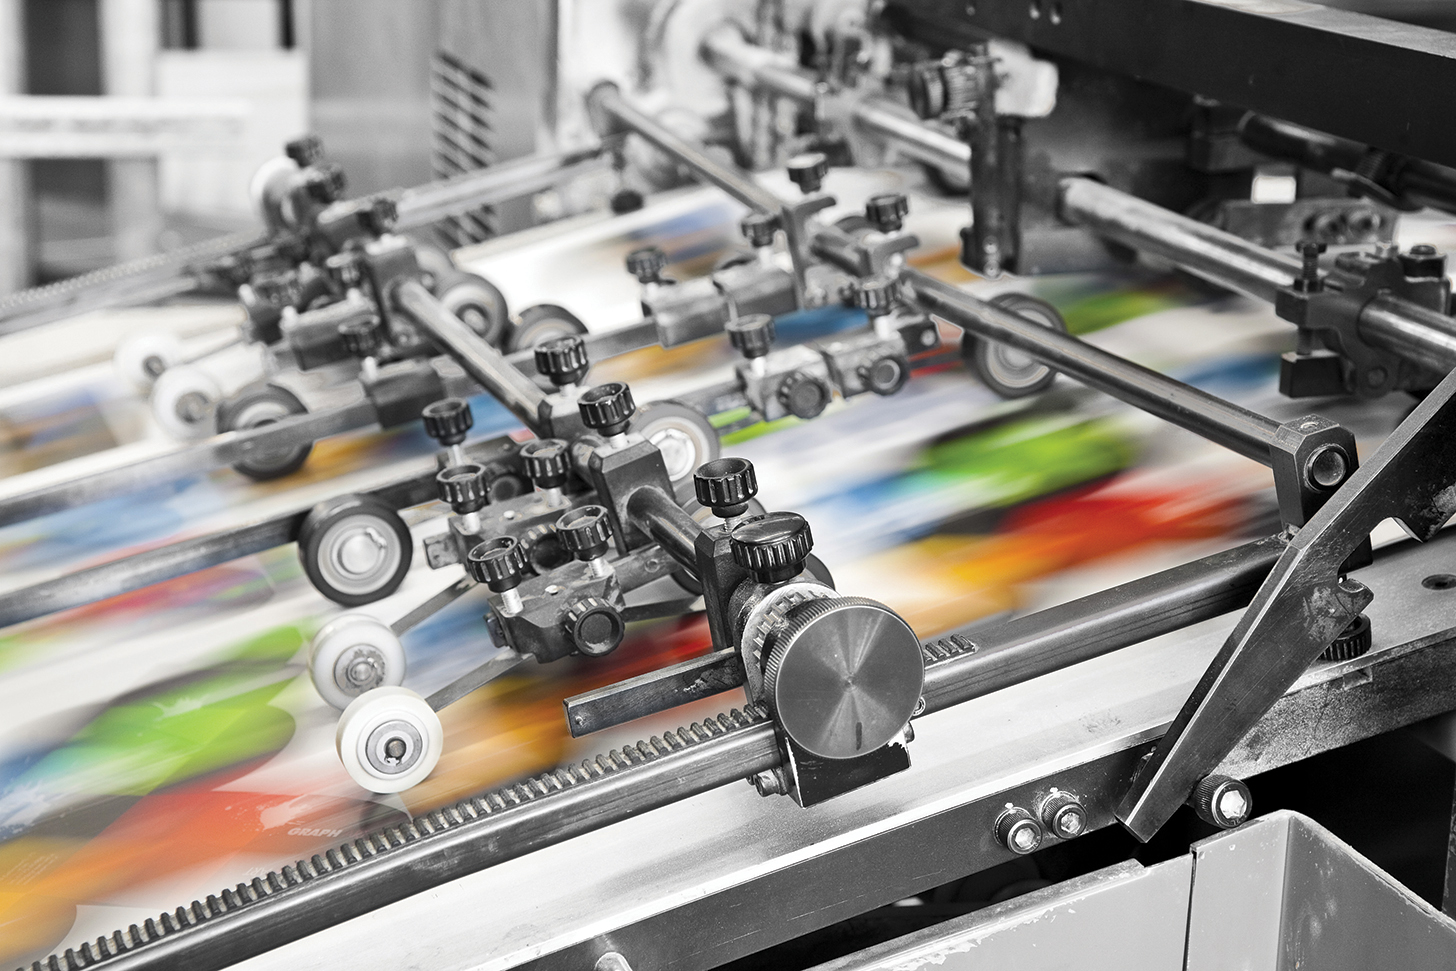 Top 4 Amazing Offset Printing Items Every Man Should Own